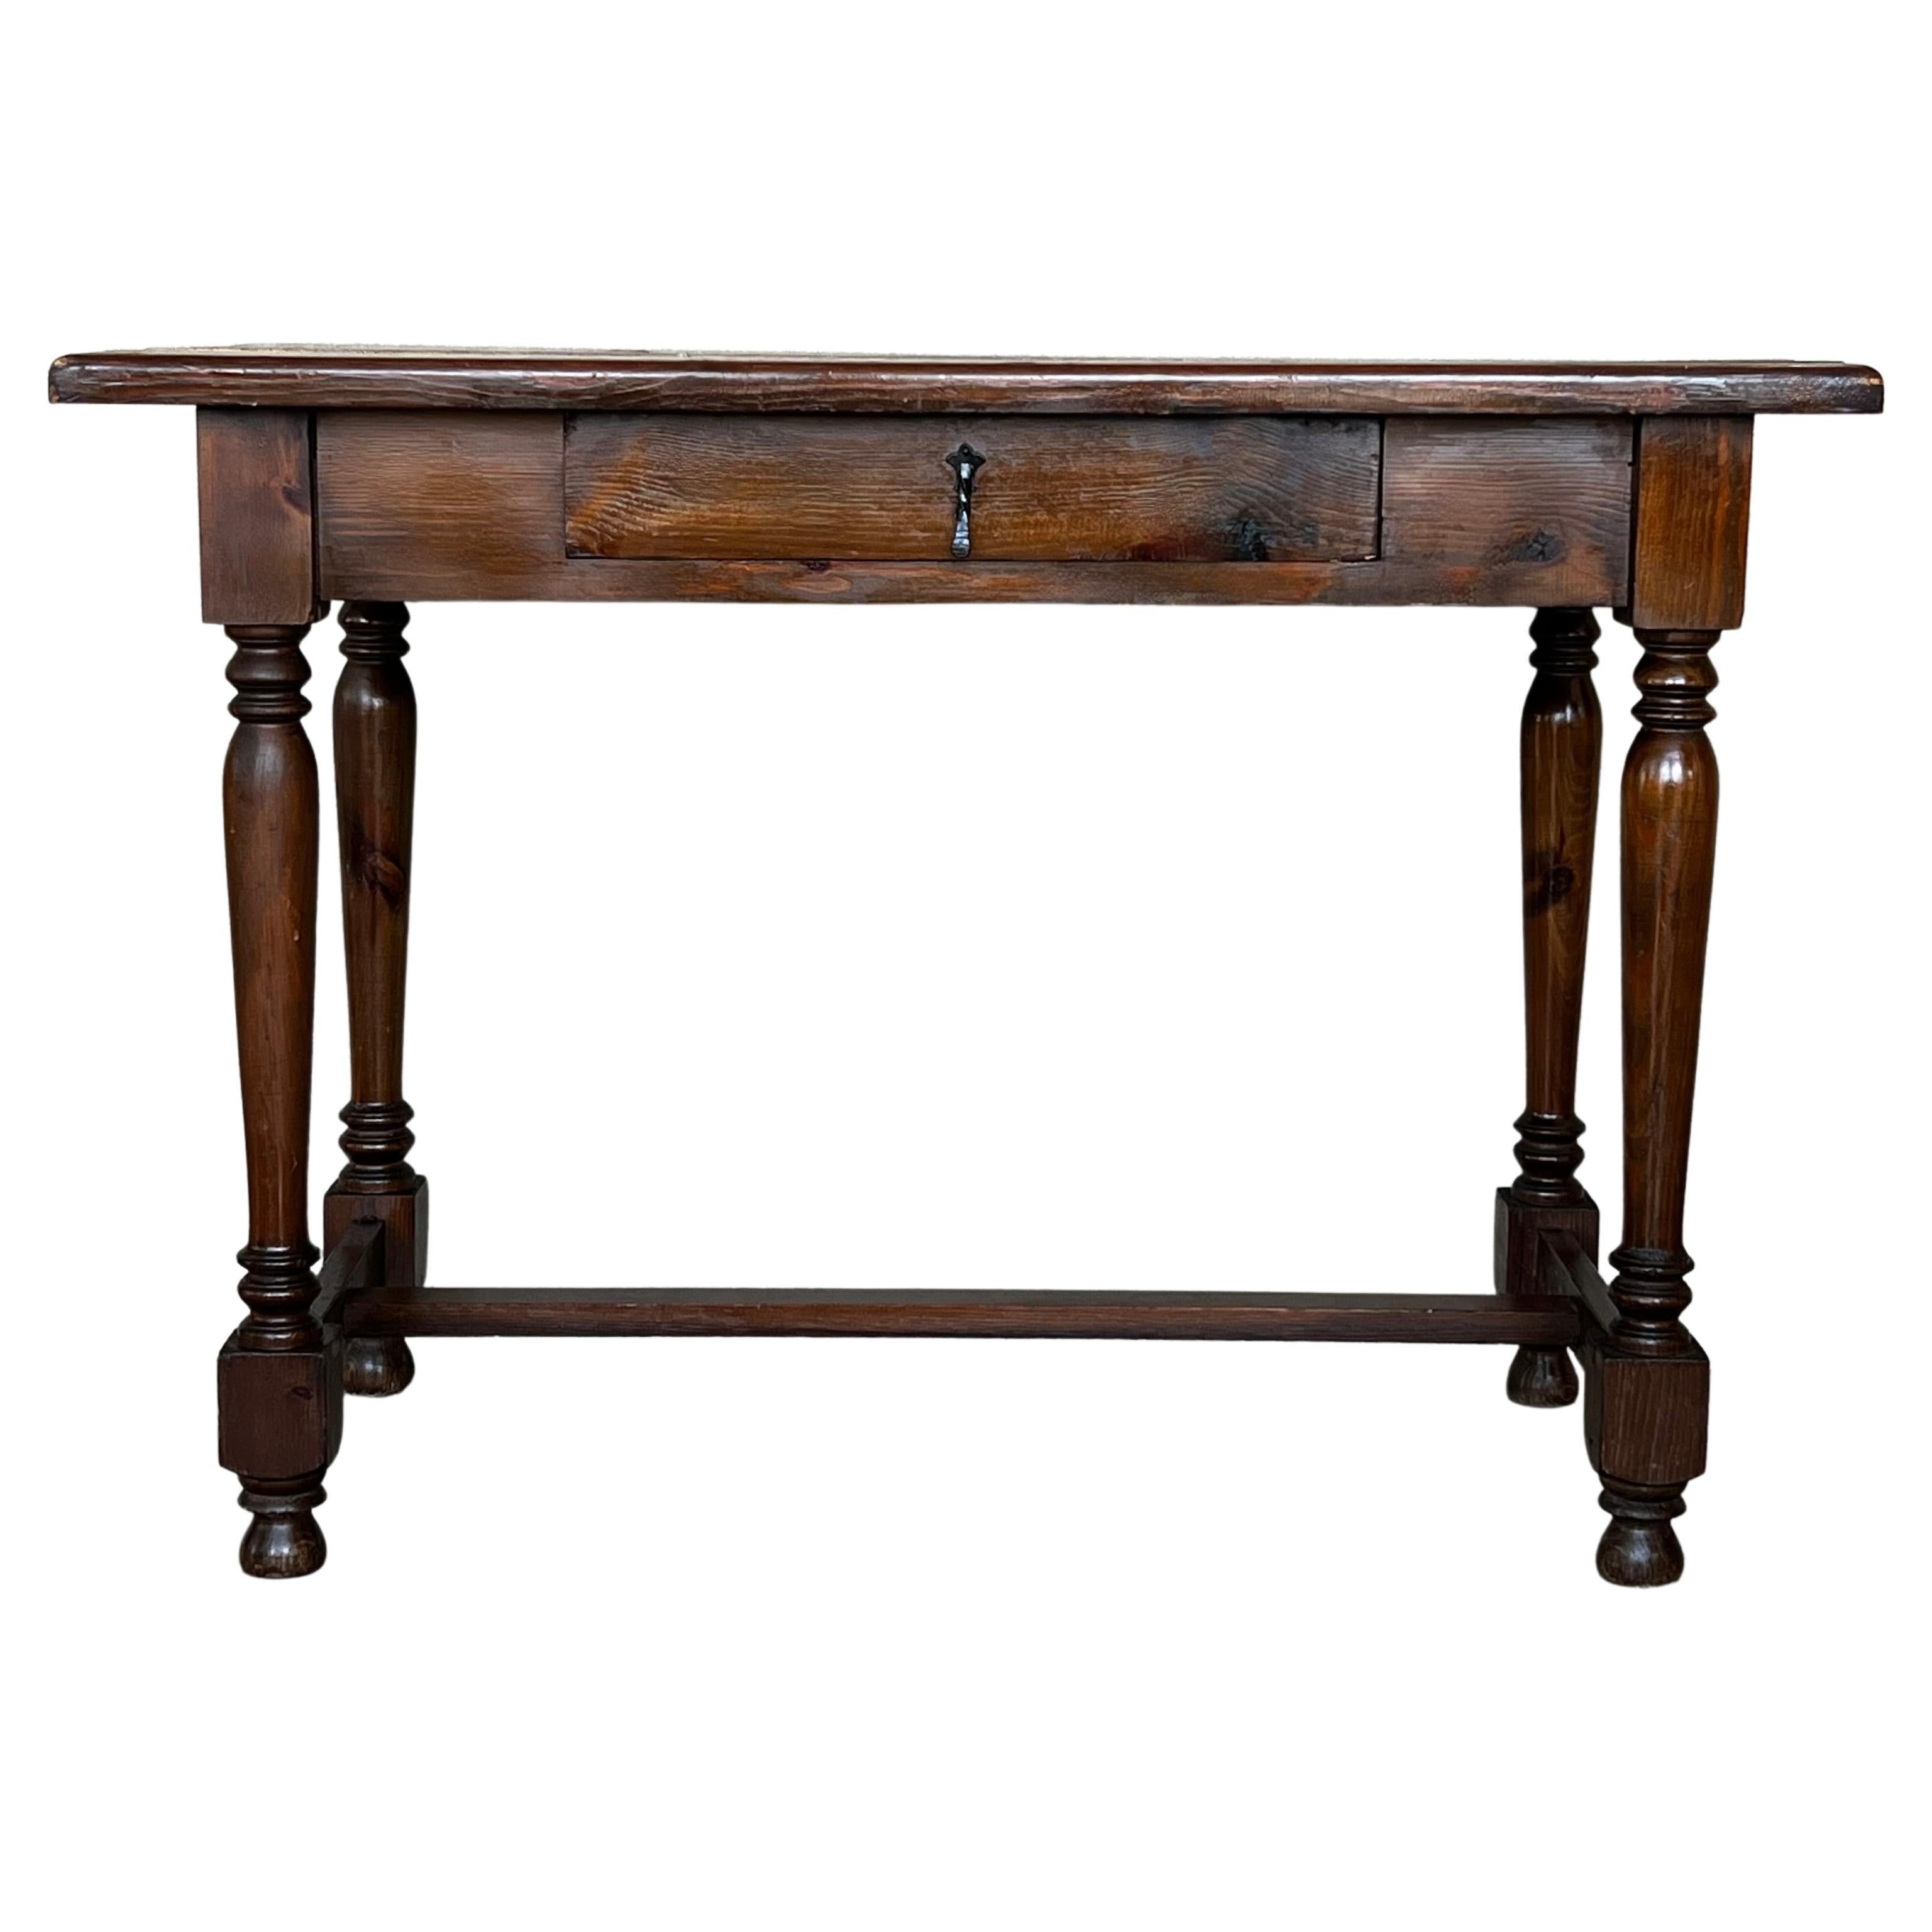 20th Century Spanish Walnut Side Table or Console Table with Drawer